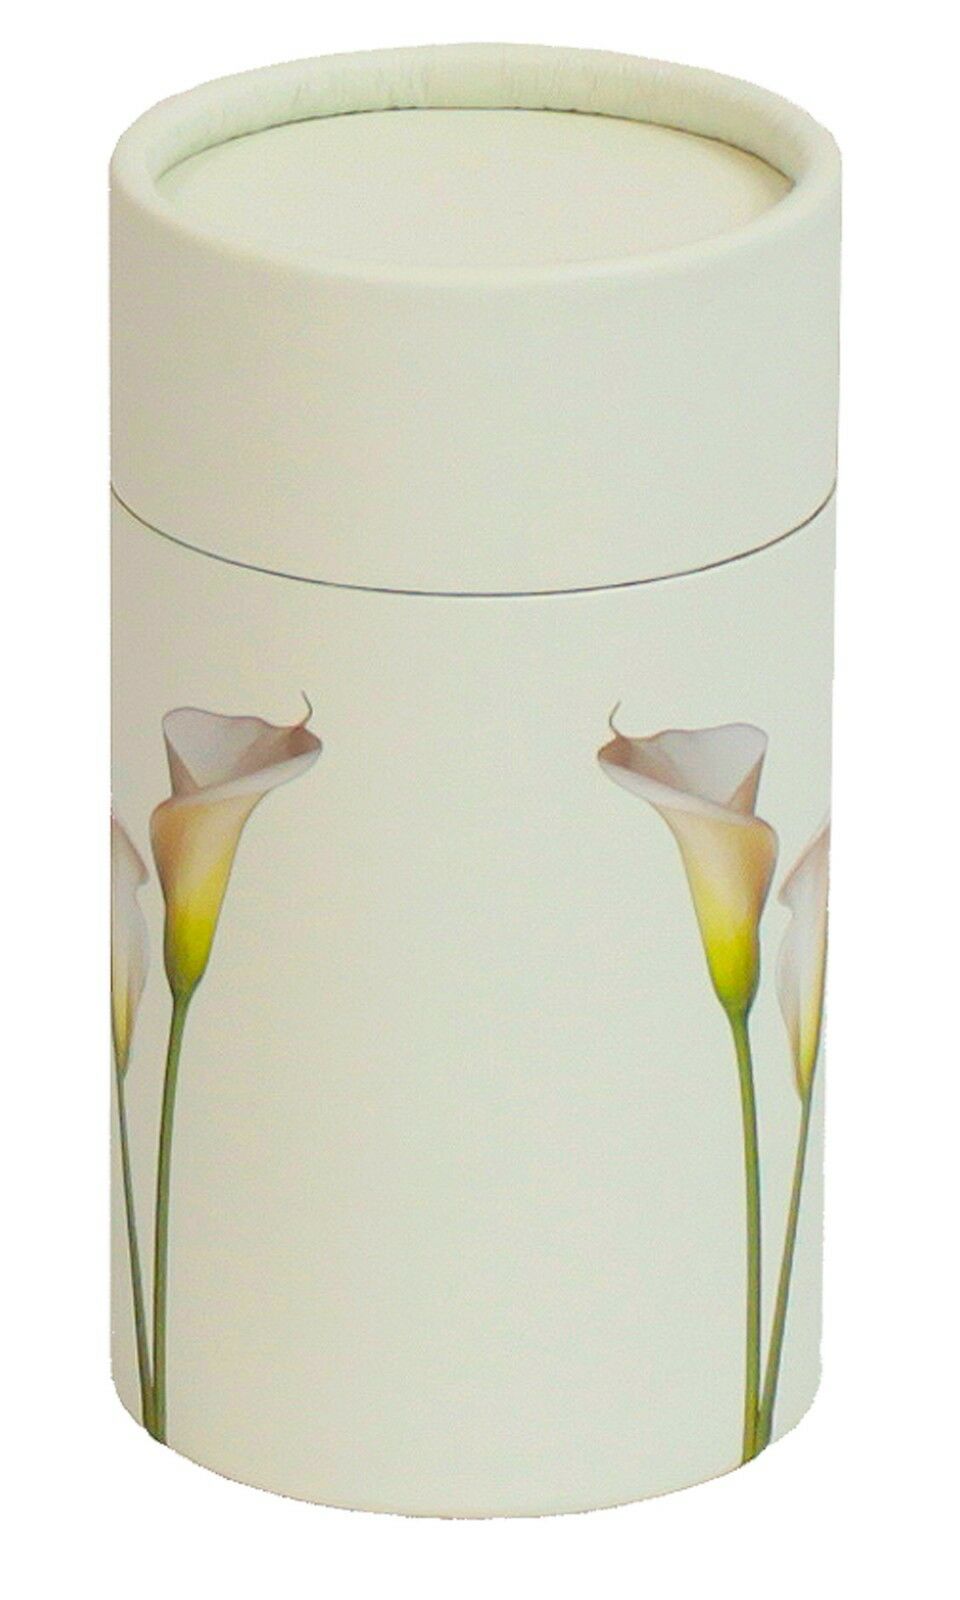 Biodegradable Lily Ash Scattering Tube Funeral Cremation Urn - 20 cubic inches